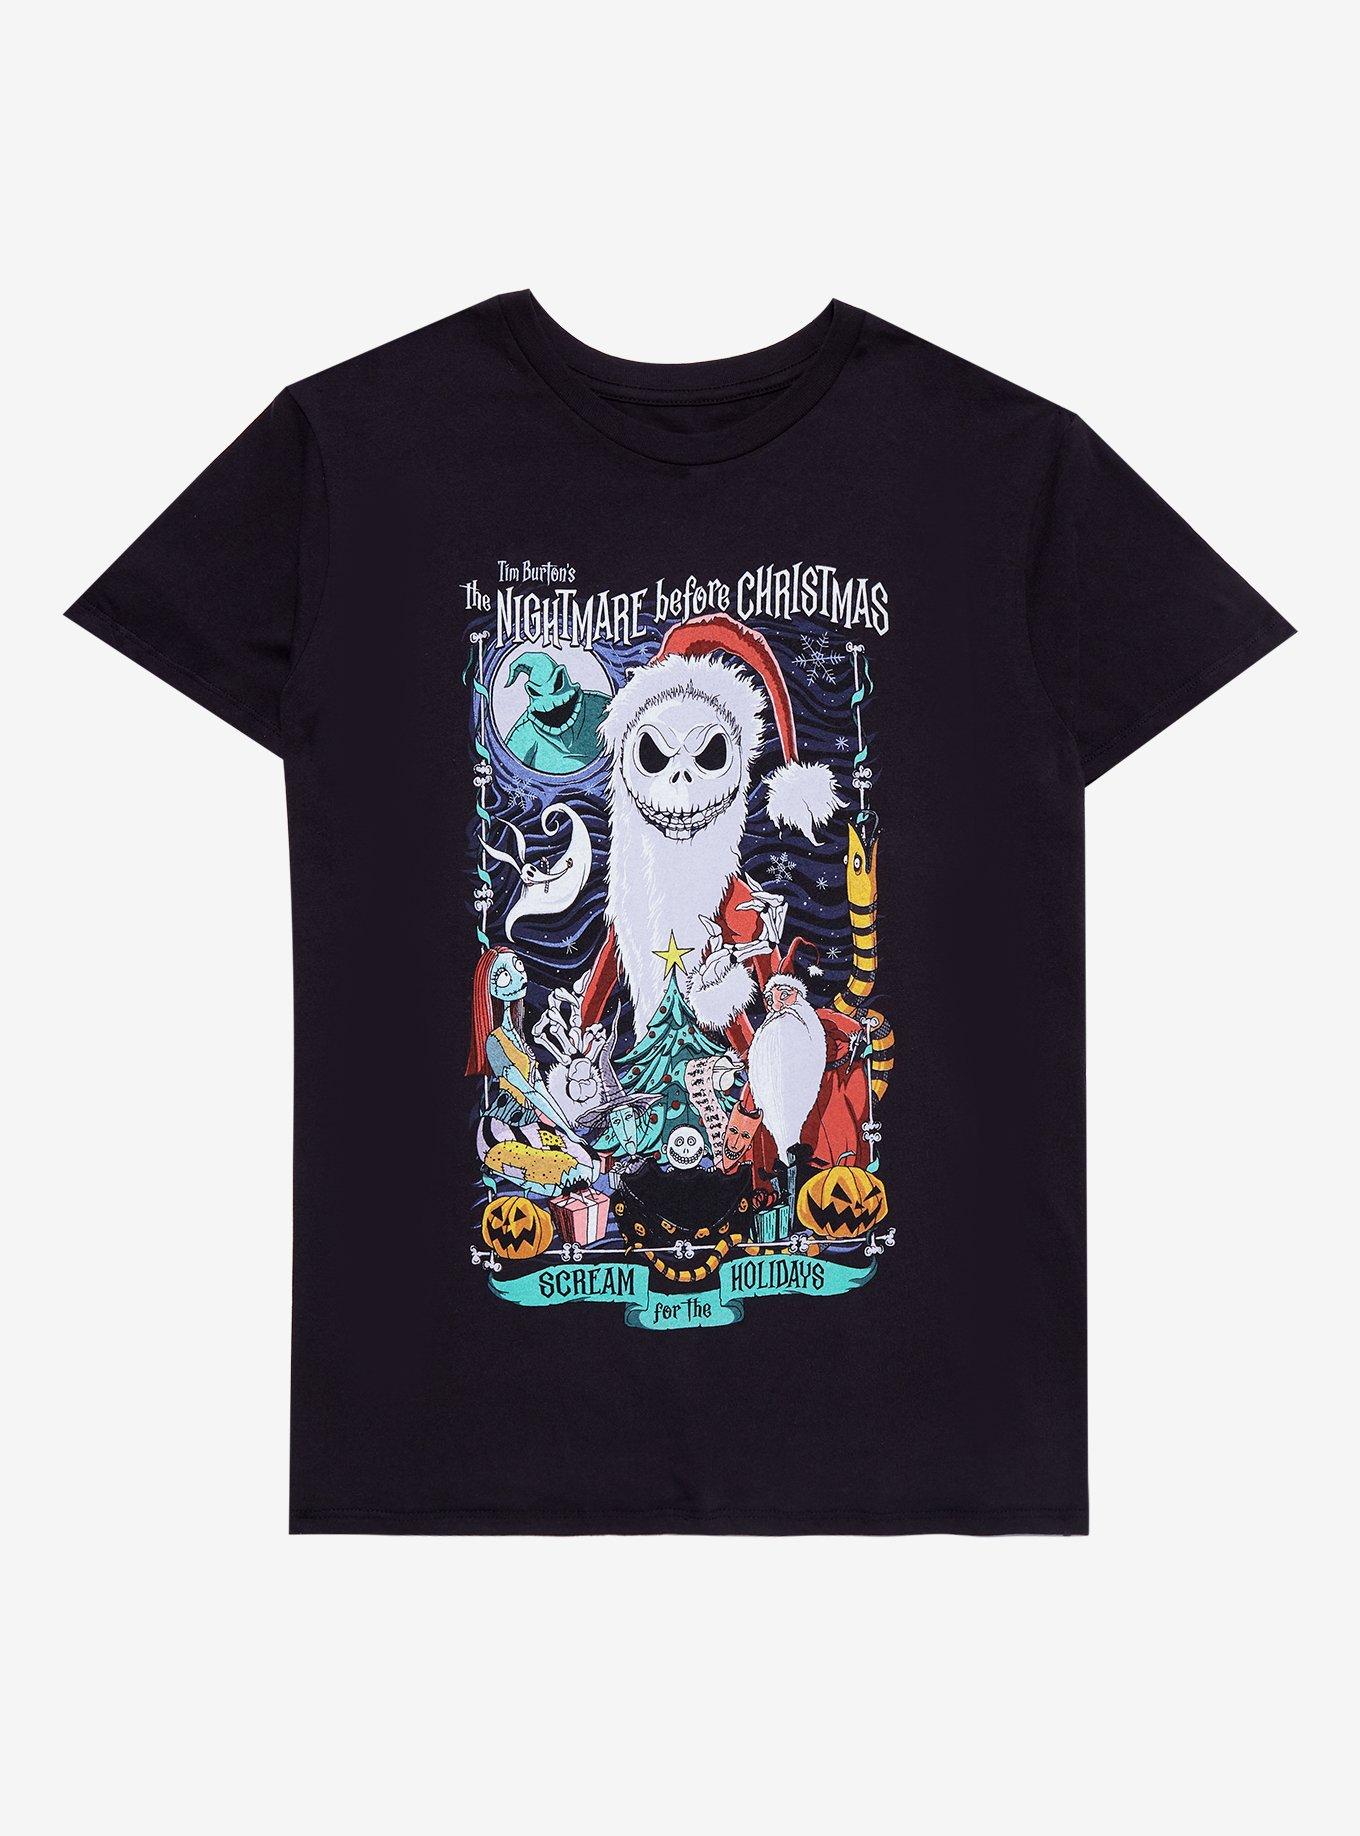 The Nightmare Before Christmas Holiday Boyfriend Fit Girls T-Shirt, MULTI, hi-res